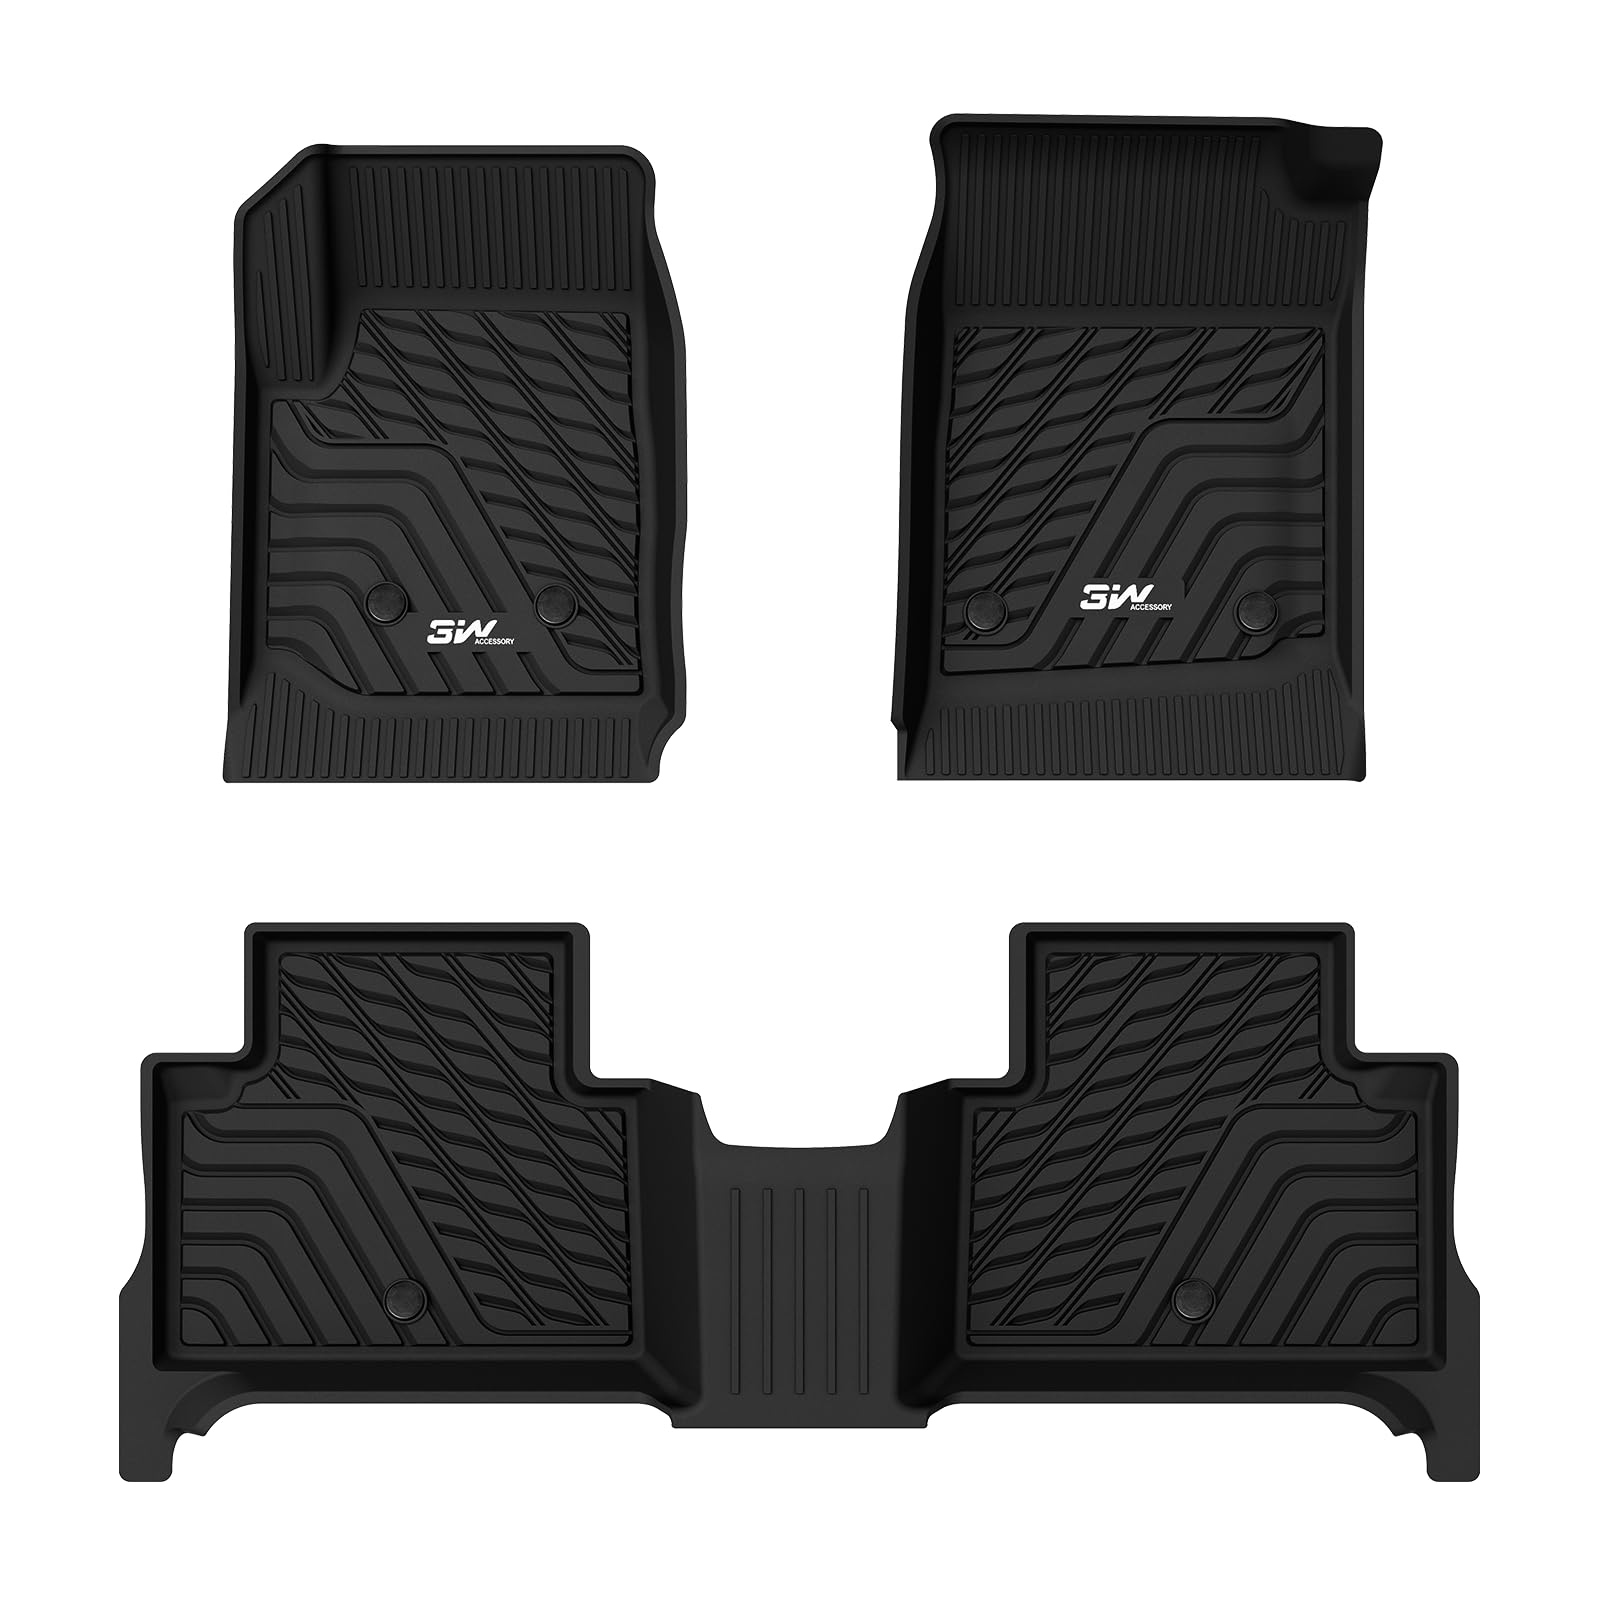 3W Chevy / Chevrolet Colorado Crew Cab / GMC Canyon Crew Cab 2015-2022 Custom Floor Mats TPE Material & All-Weather Protection Vehicles & Parts 3W 2015-2022 Colorado 2015-2022 1st&2nd Row Mats